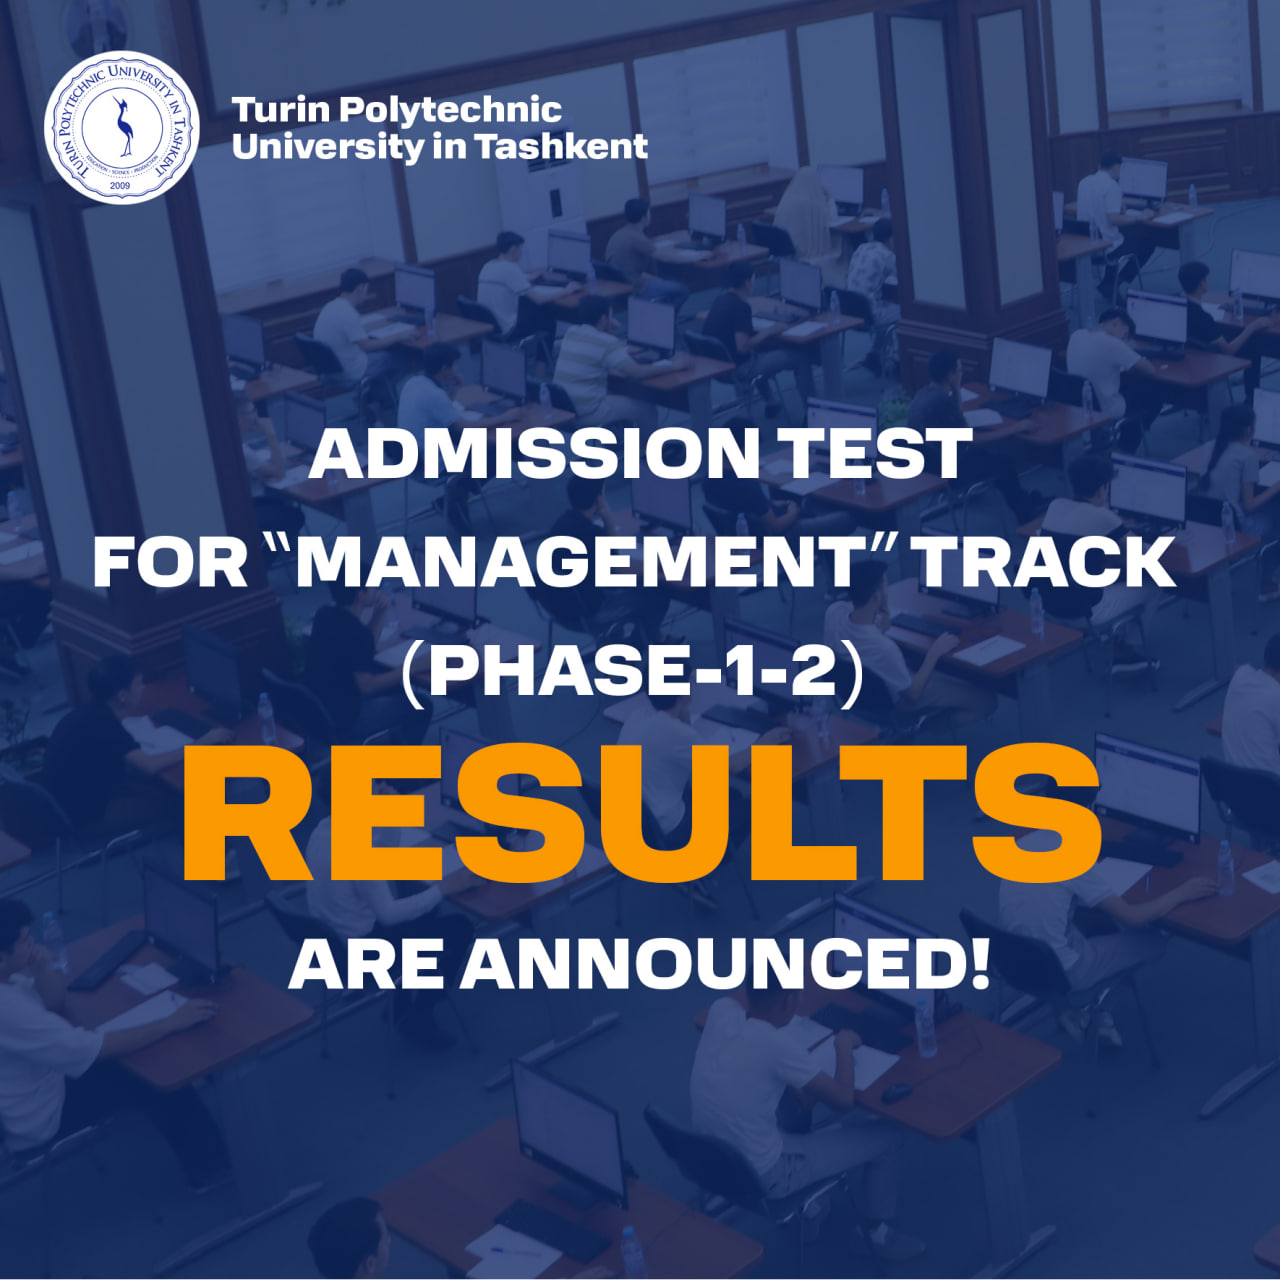 You are currently viewing Admission Test for “Management” Track (Phase-1-2) Results are announced!